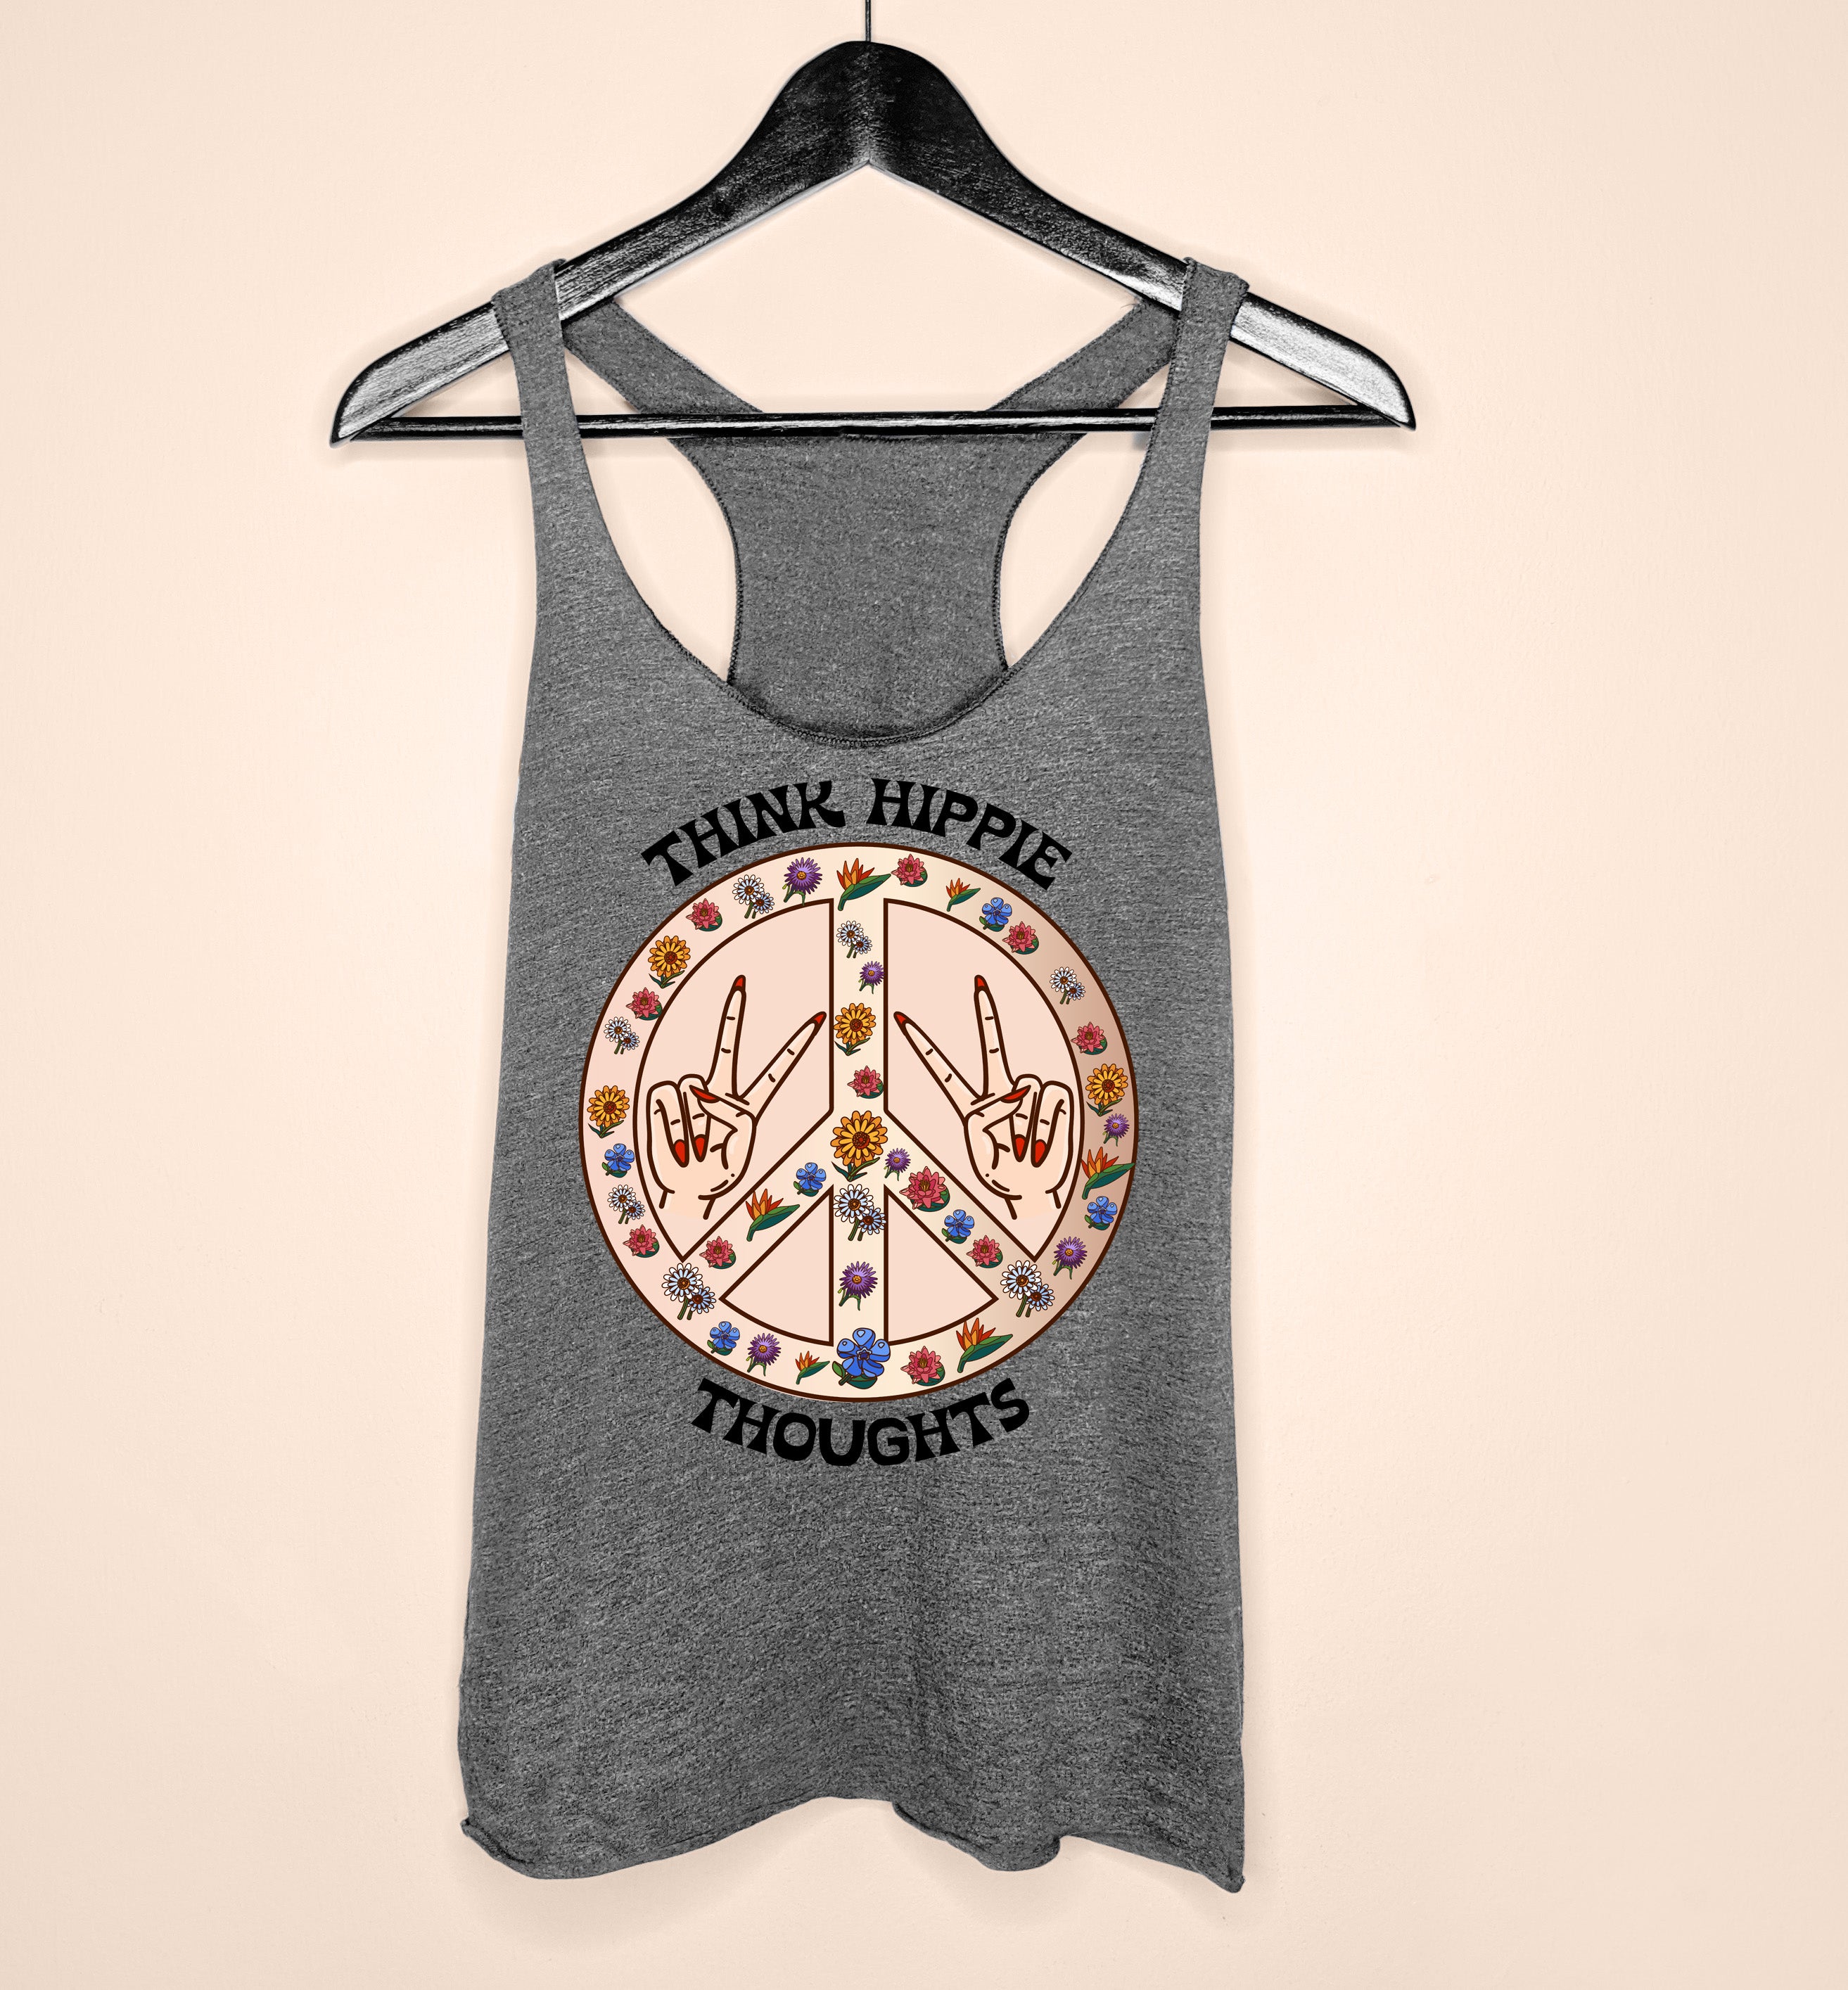 Grey tank top with a floral peace sign saying think hippie thoughts - HighCiti